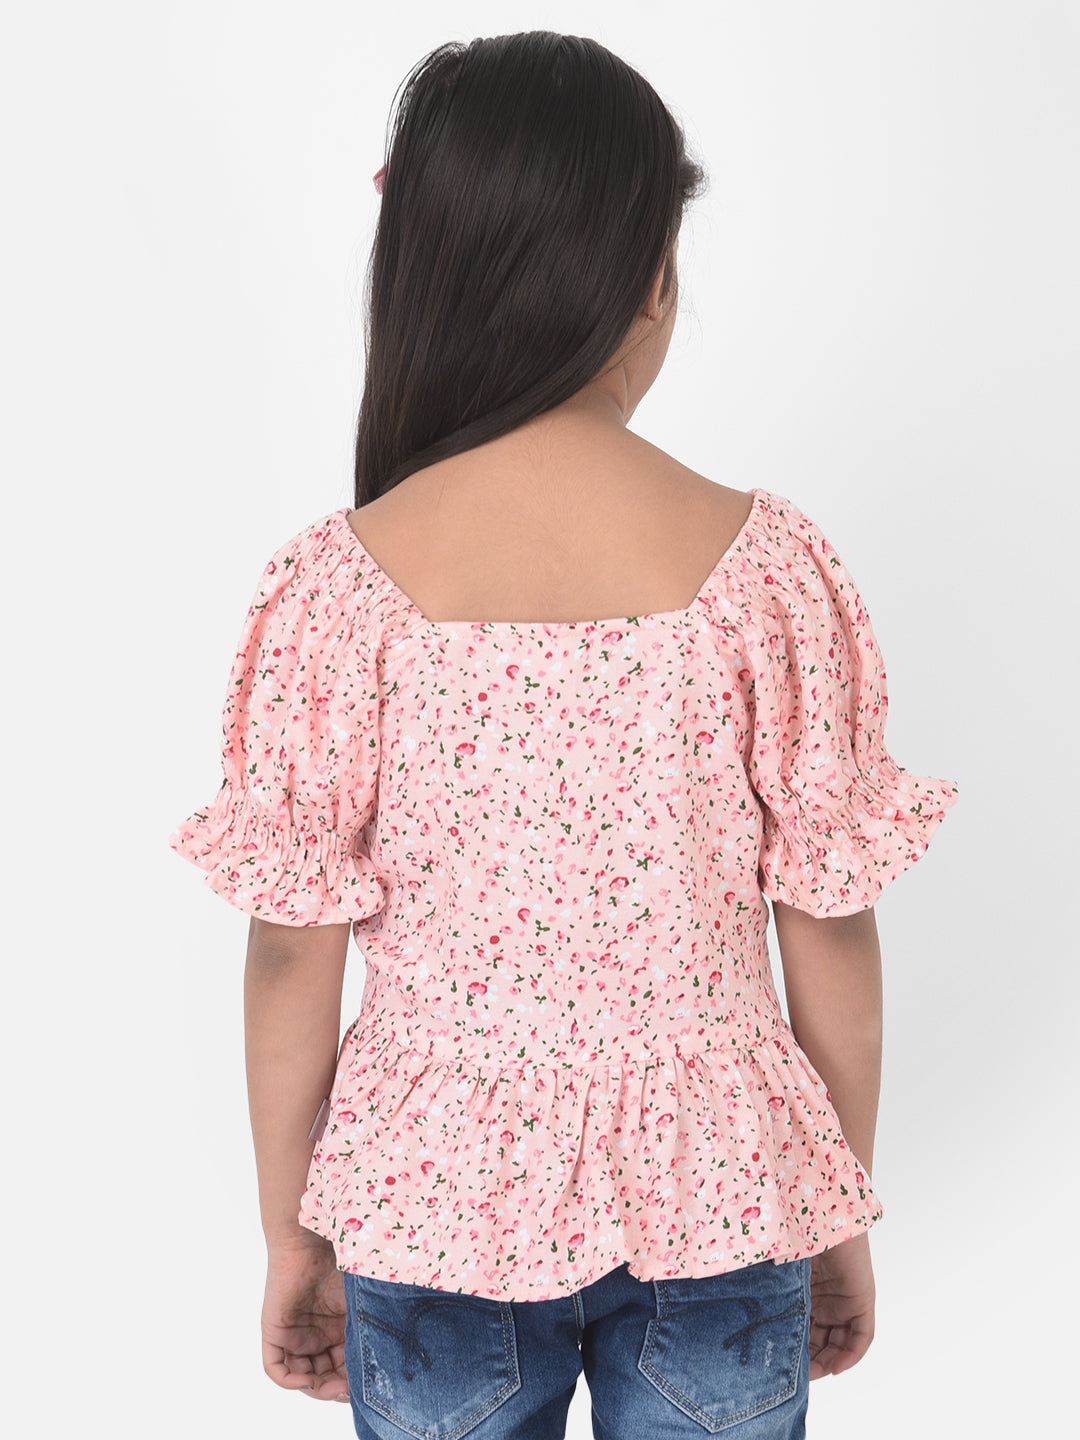 Pink Floral Printed Cinched Waist Top - Girls Tops